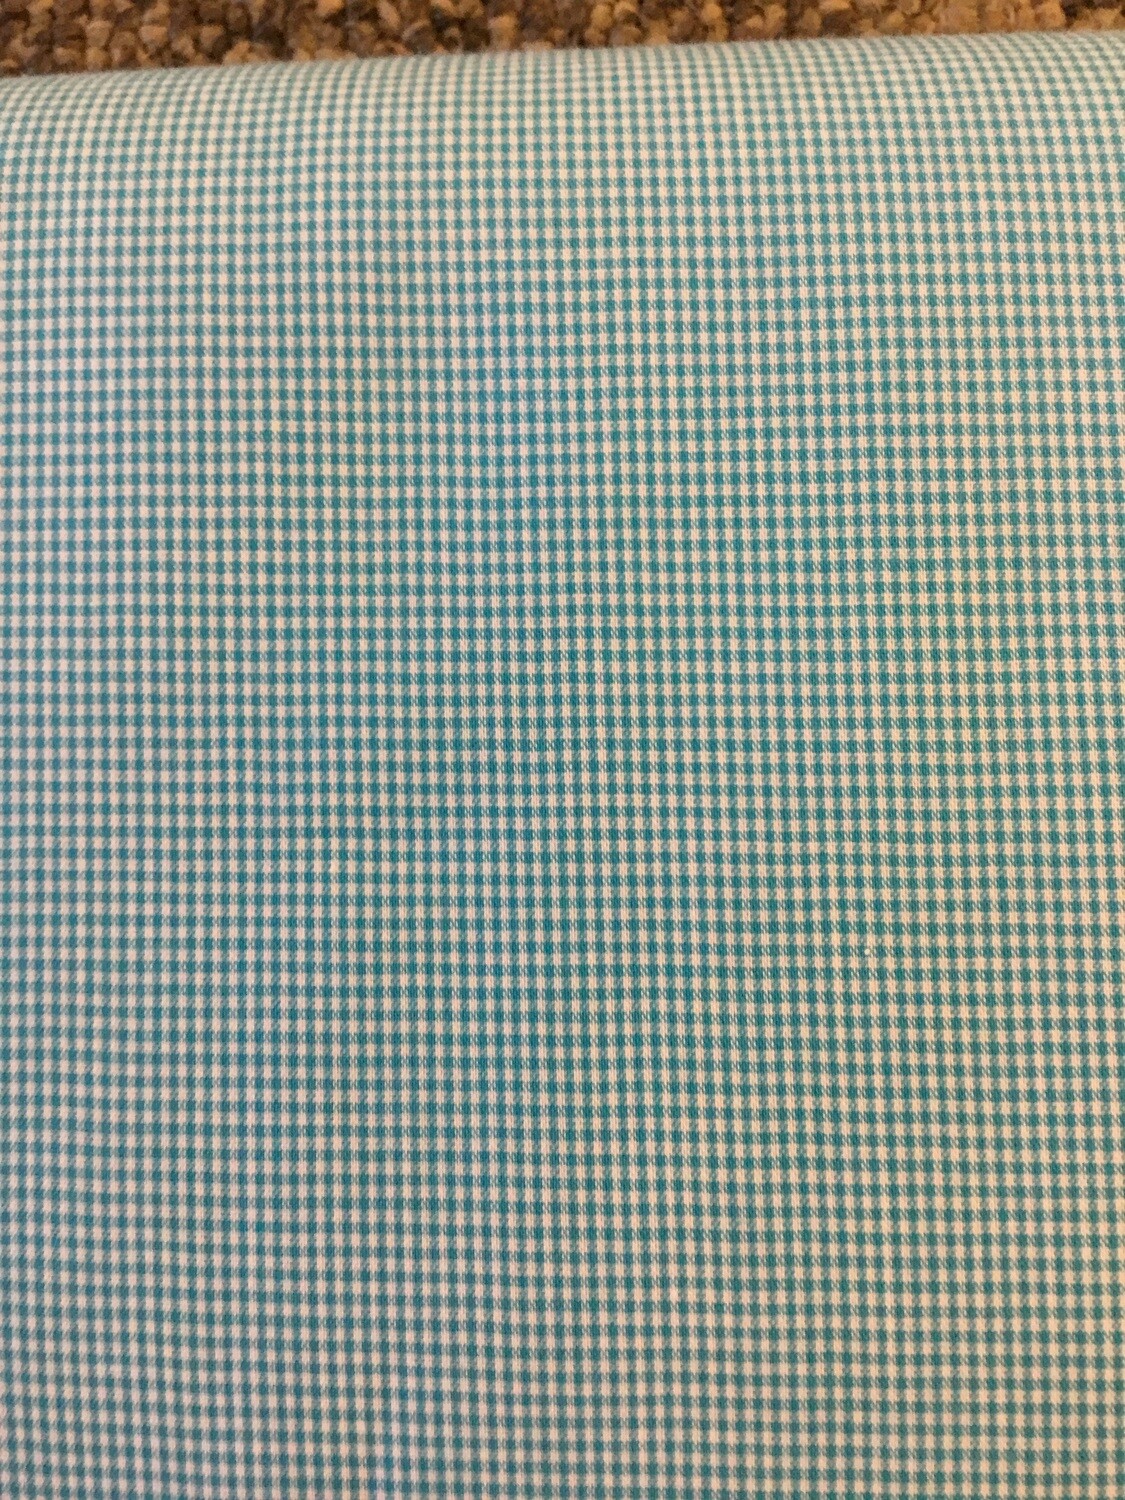 SV Microcheck turquoise Priced Per Yard)